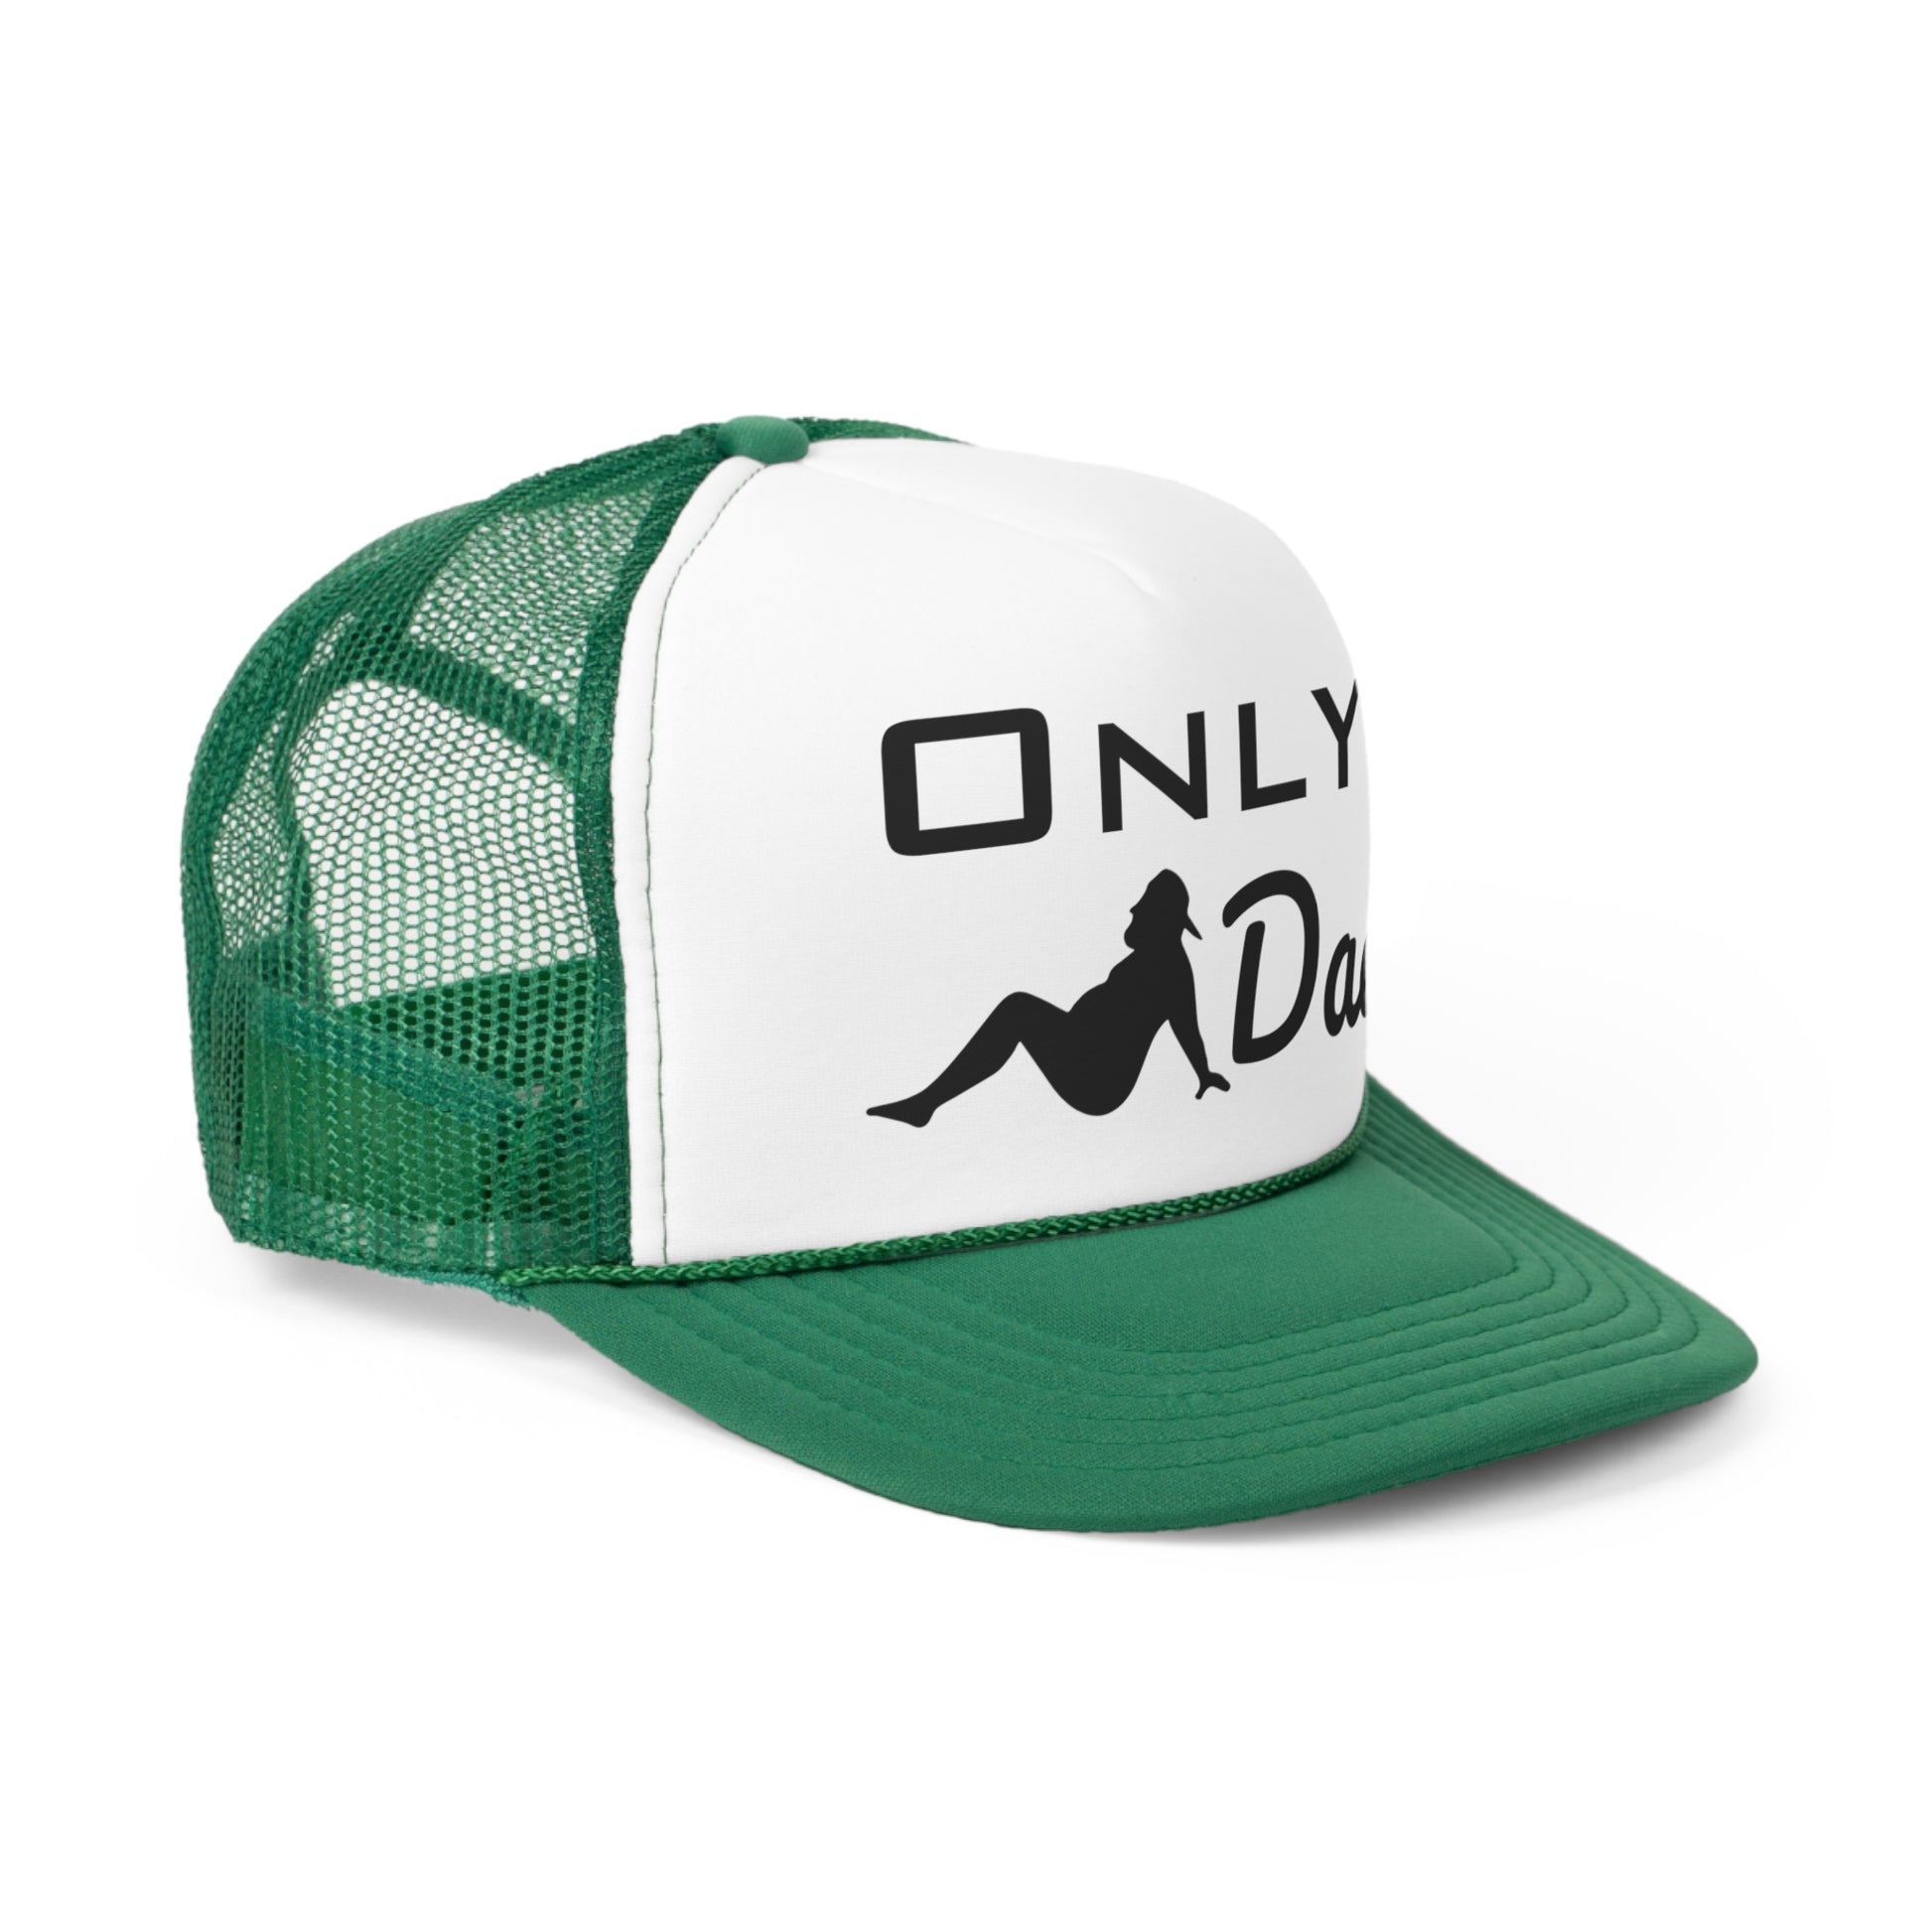 Customizable "Only Dads" cap in four color variations for proud dads.